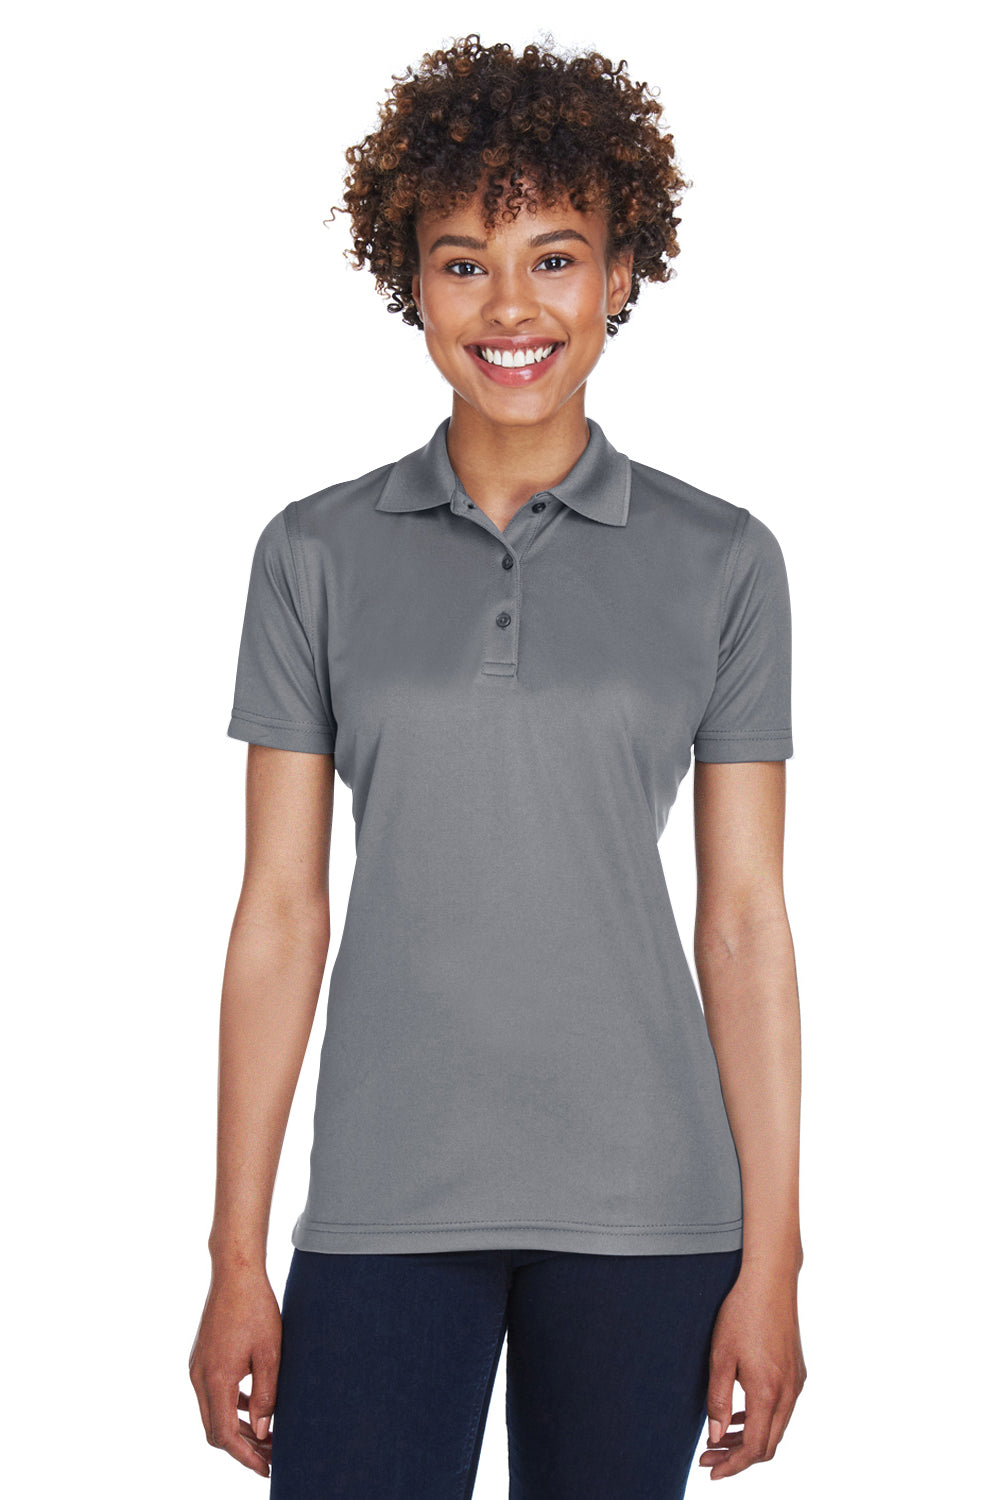 UltraClub 8210L Womens Cool & Dry Moisture Wicking Short Sleeve Polo Shirt Charcoal Grey Front